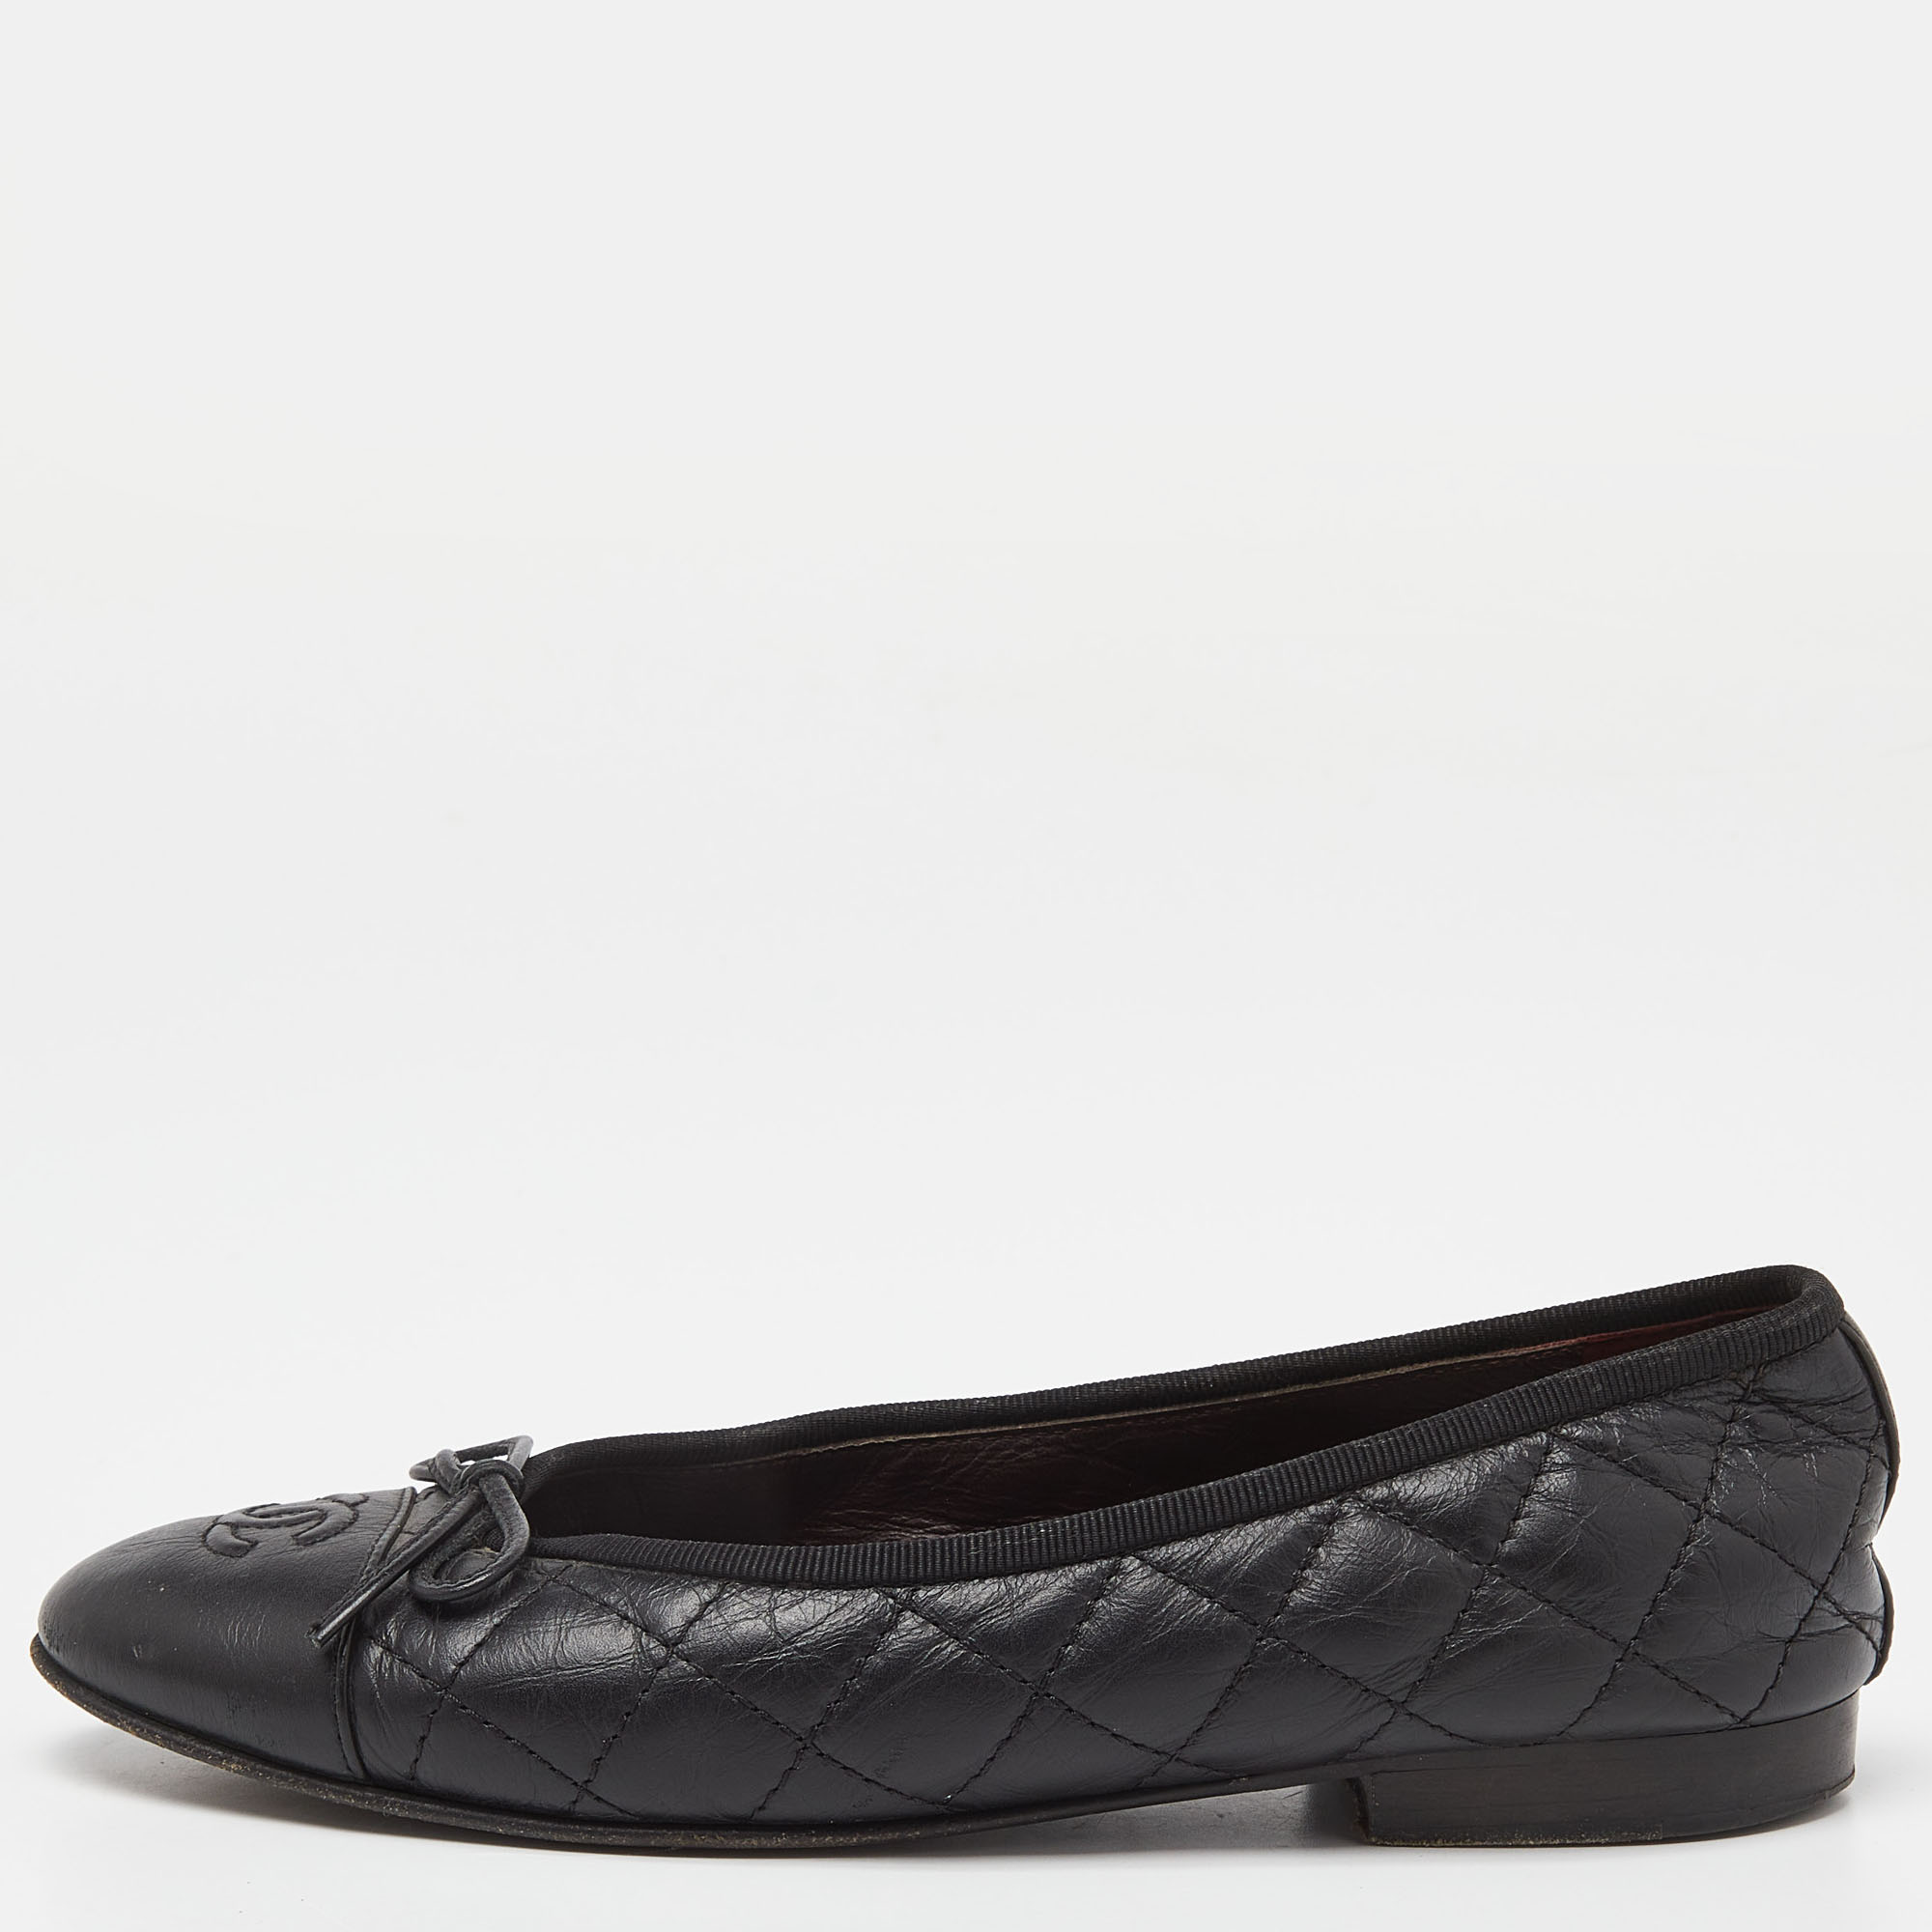 Chanel black quilted leather cc cap toe bow ballet flats size 35